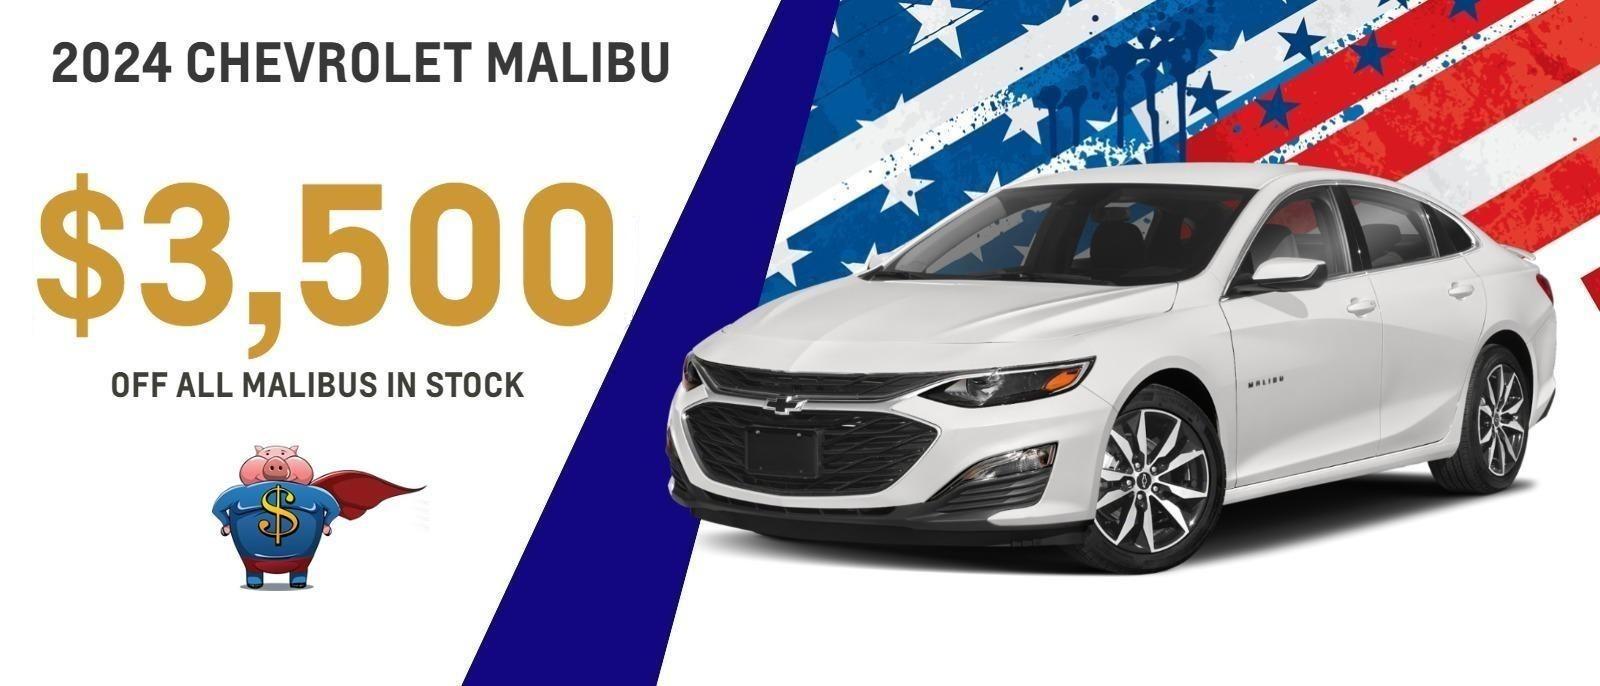 $3,500 OFF MSRP ON ALL IN STOCK 2024 CHEVROLET MALIBU